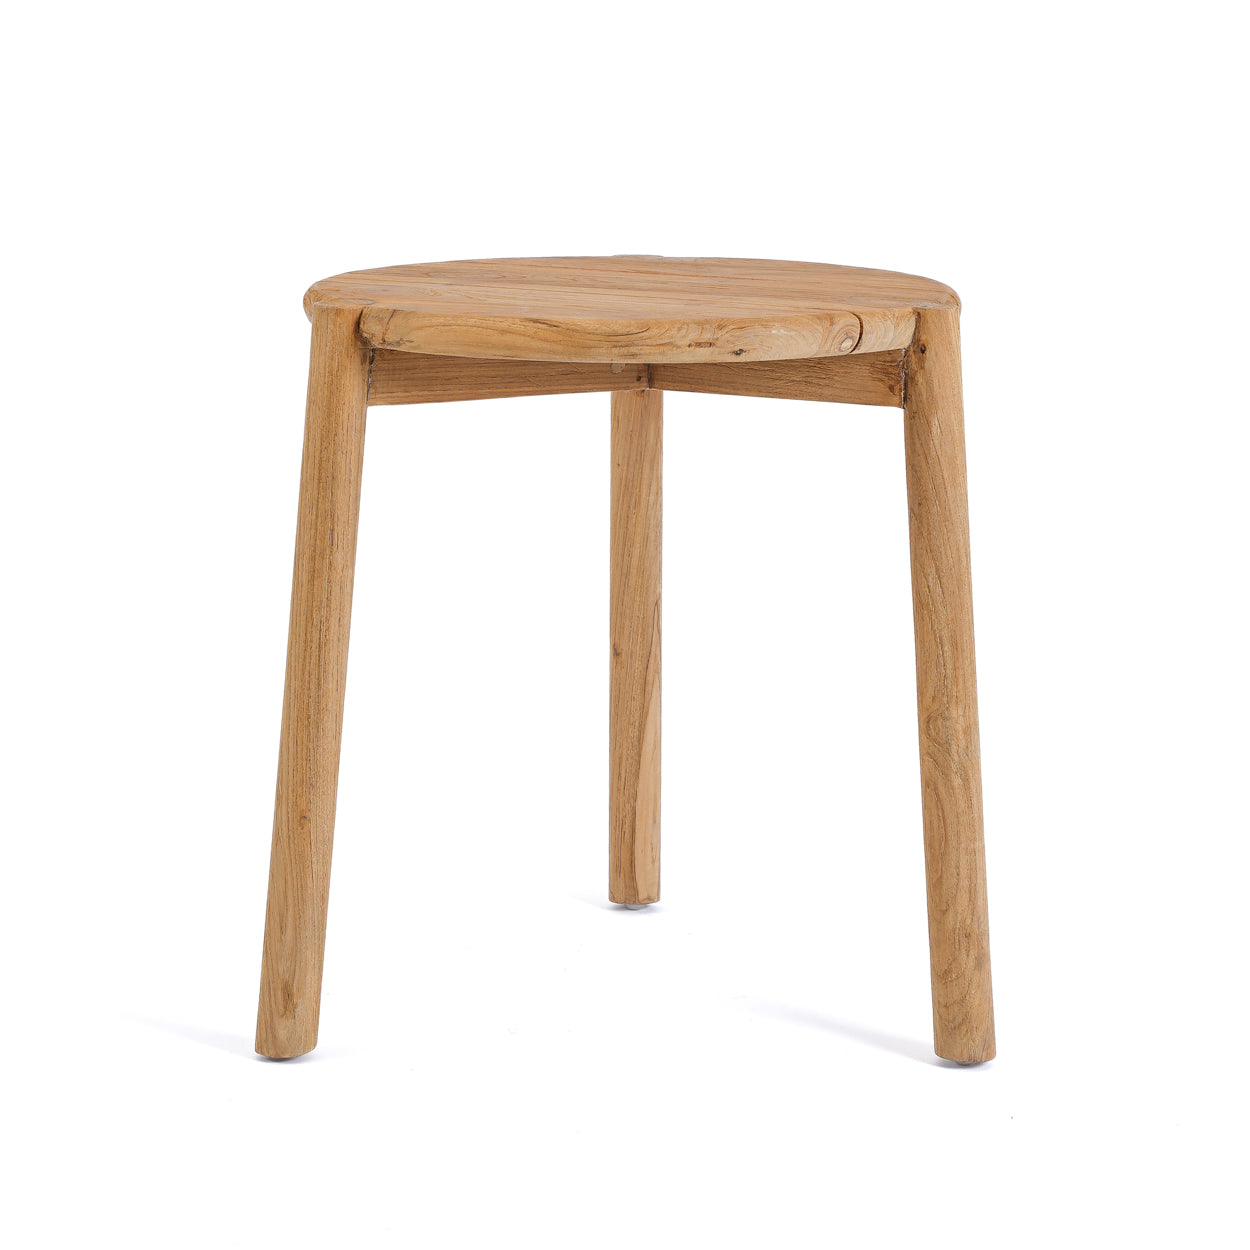 The GILIMANUK Side Table - Outdoor